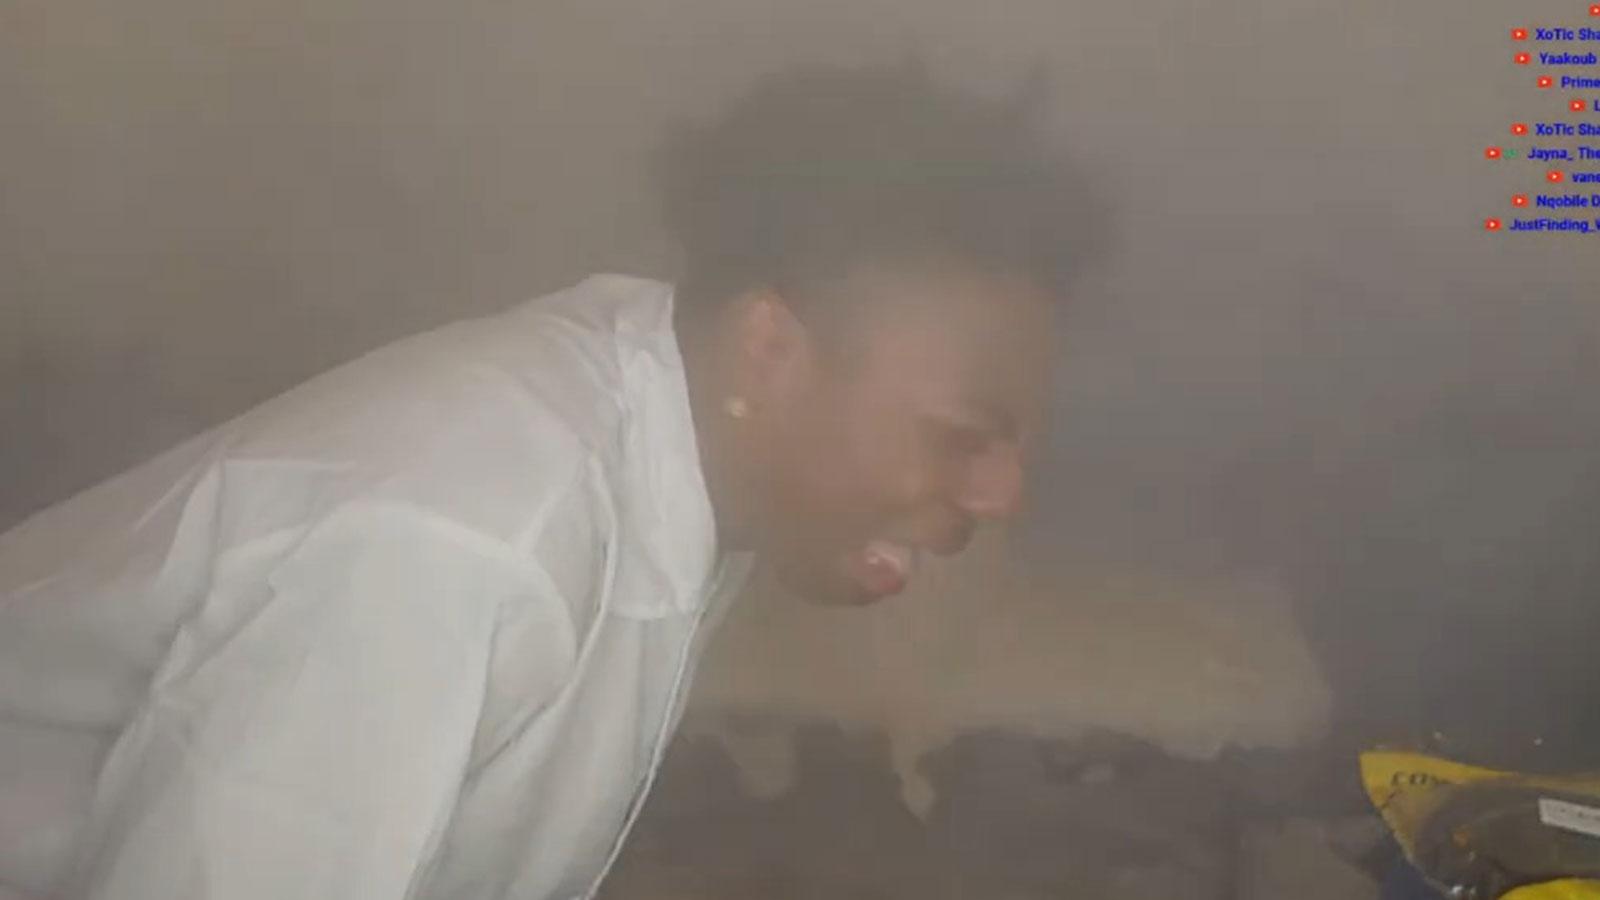 IShowSpeed coughing in his bedroom full of smoke